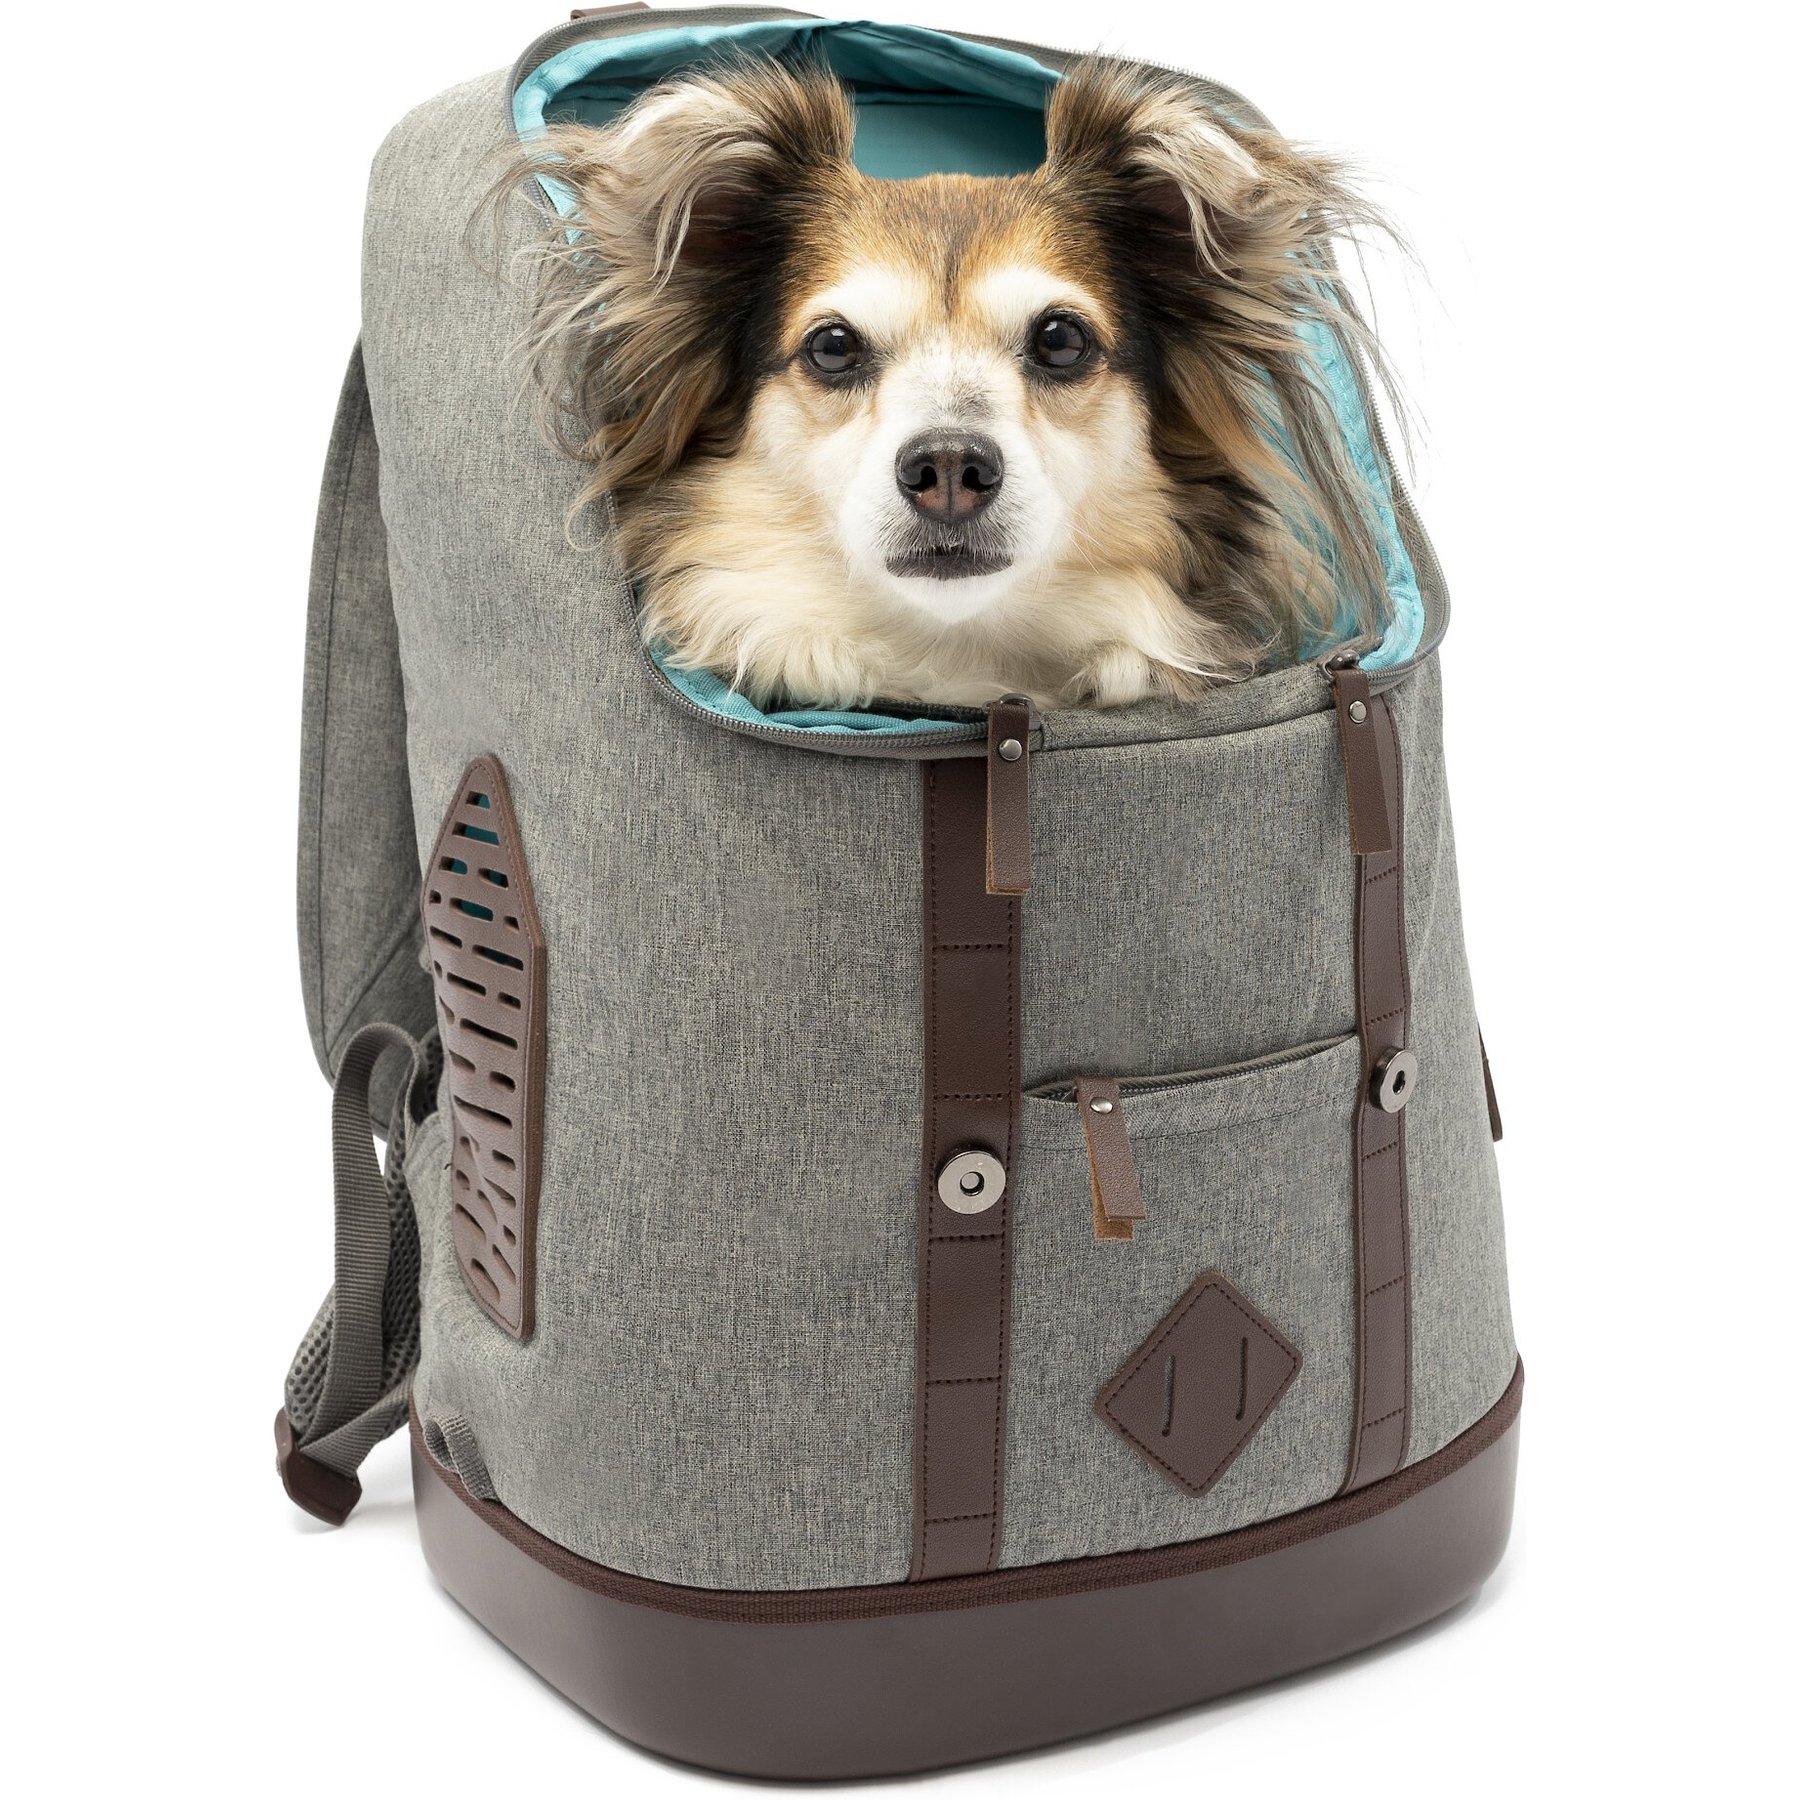 Katziela Rolling Pet Carrier Airline Approved - Pet Carrier with Wheels -  Luxury Lorry - Deluxe TSA Approved Cat Carrier with Wheels - Small Airline  Approved Dog Carrier Trolley - Plane Carry On Bag